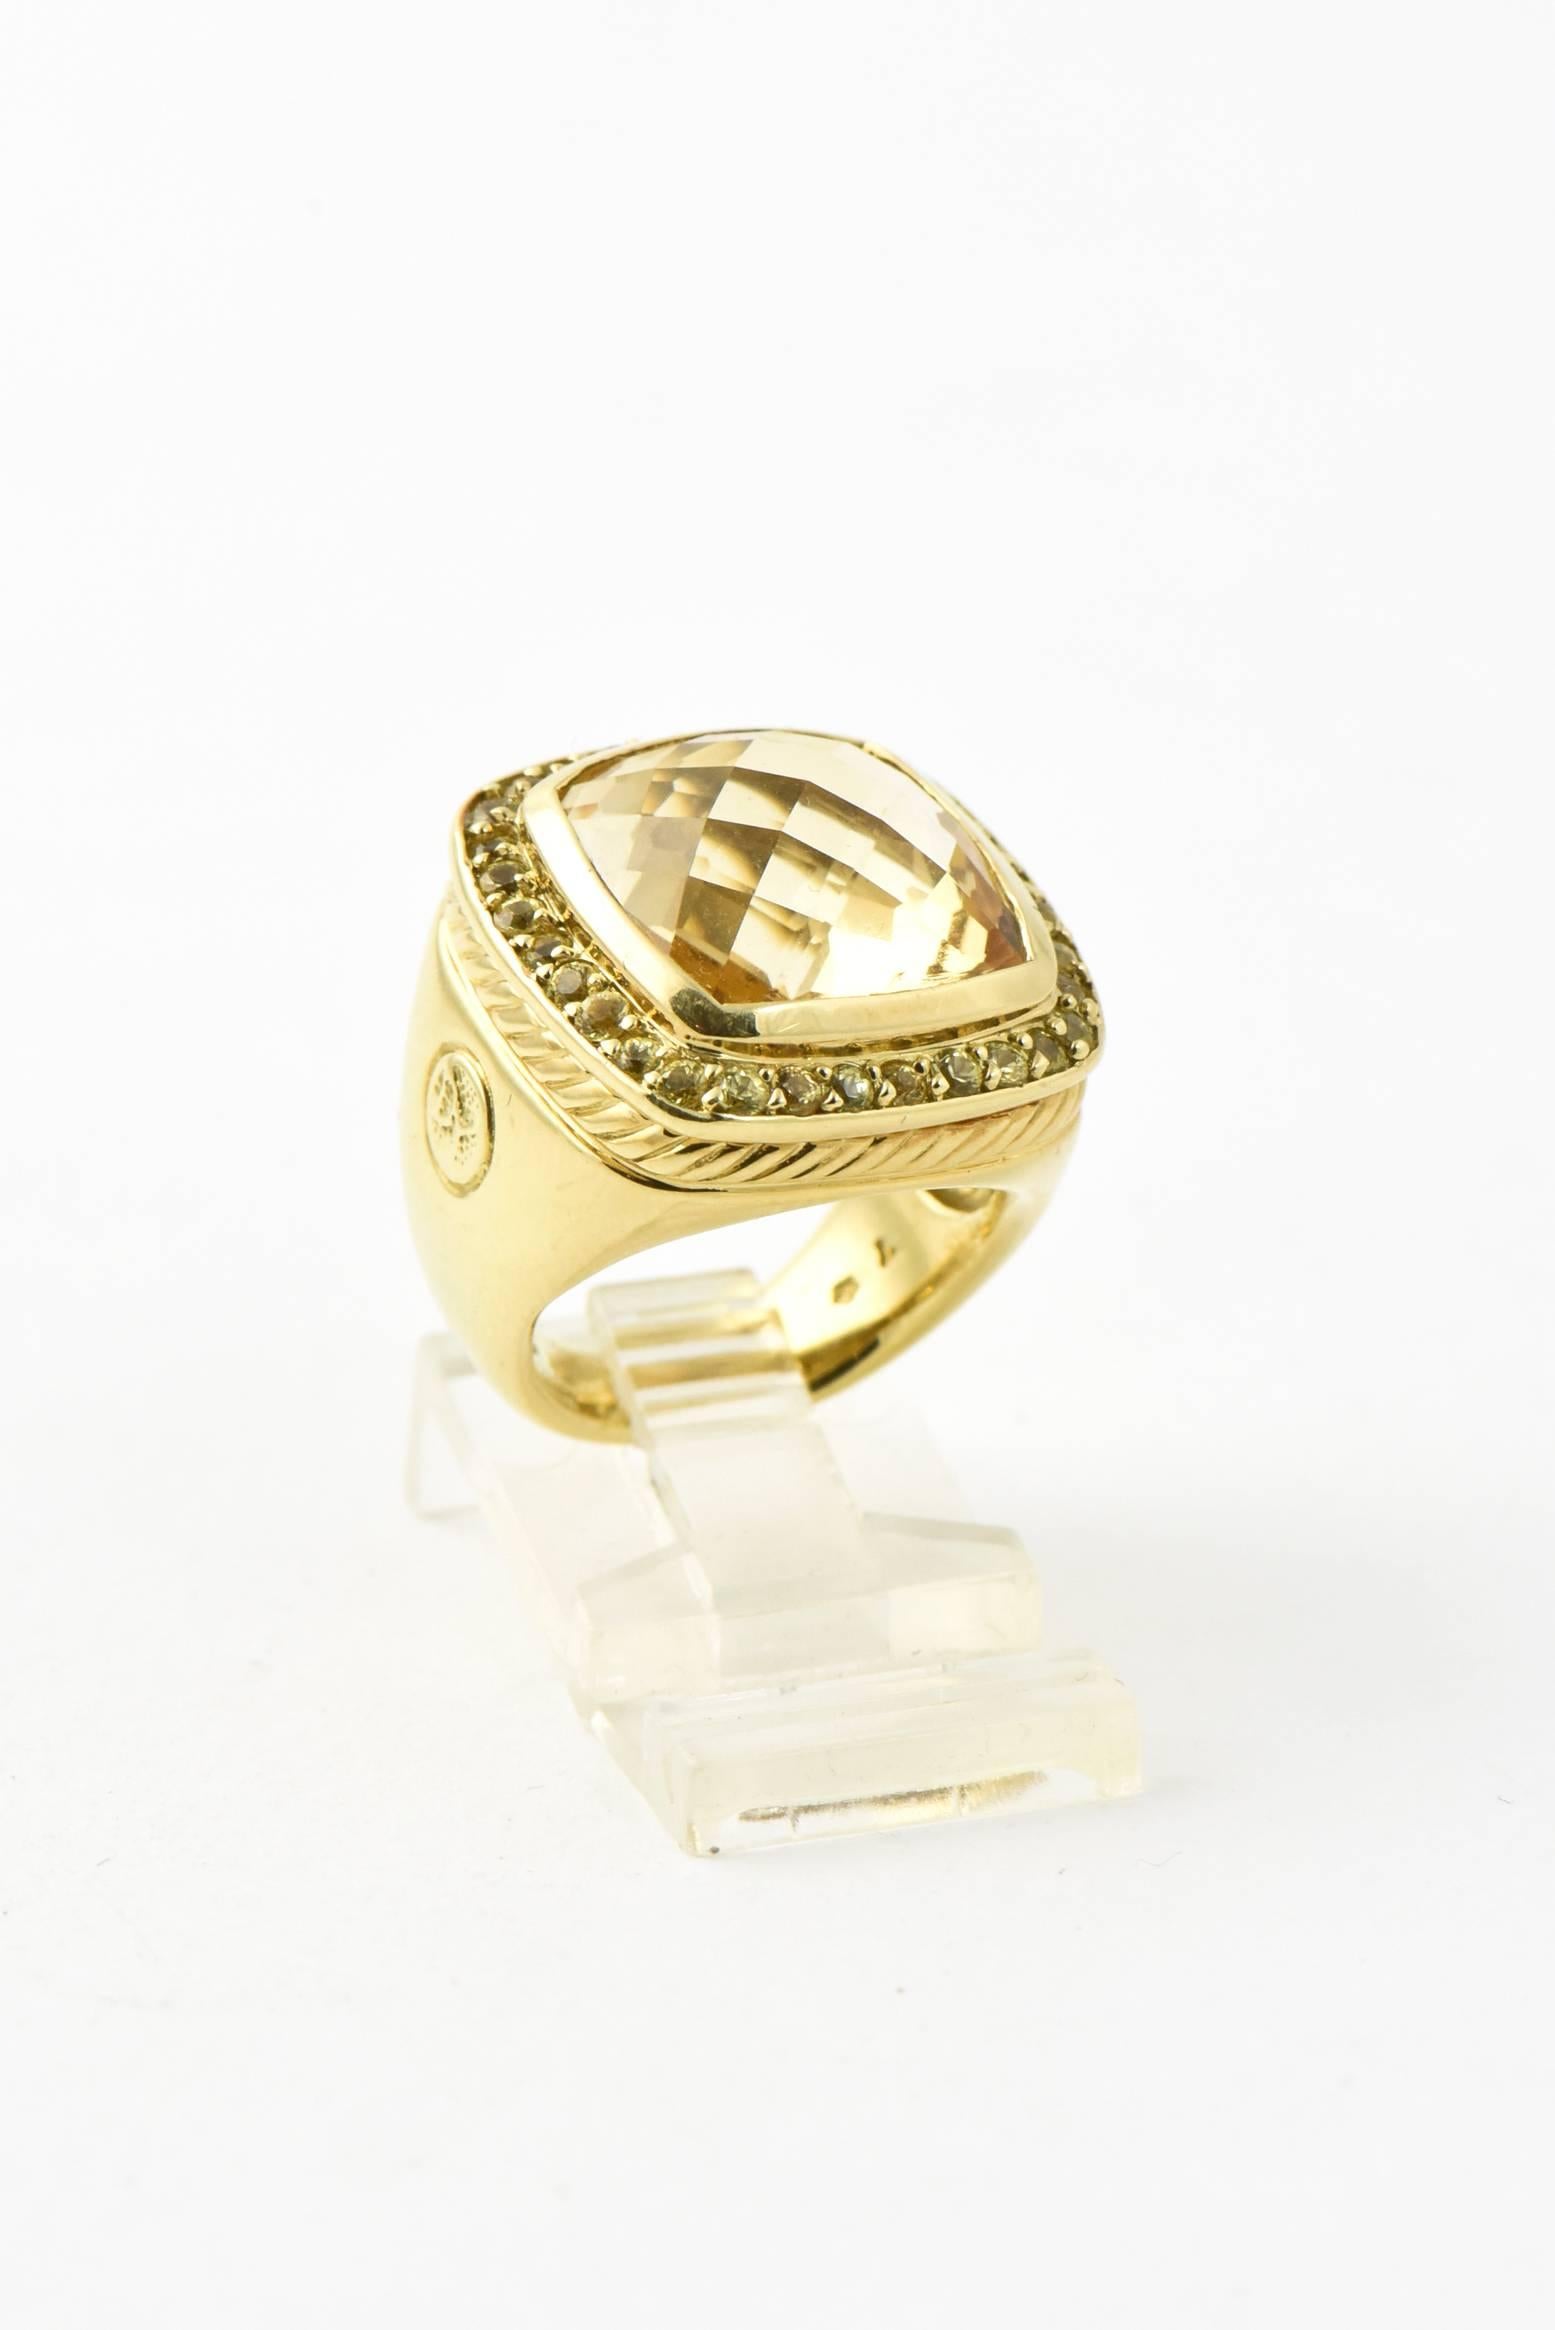 This 18k yellow gold ring is part of David Yurman's Albion® Collection.  It  features a unique oversized cushion-cut faceted citrine center stone surrounded by pavé set yellow sapphires.  The outer frame of this ring has the typical Yurman cable